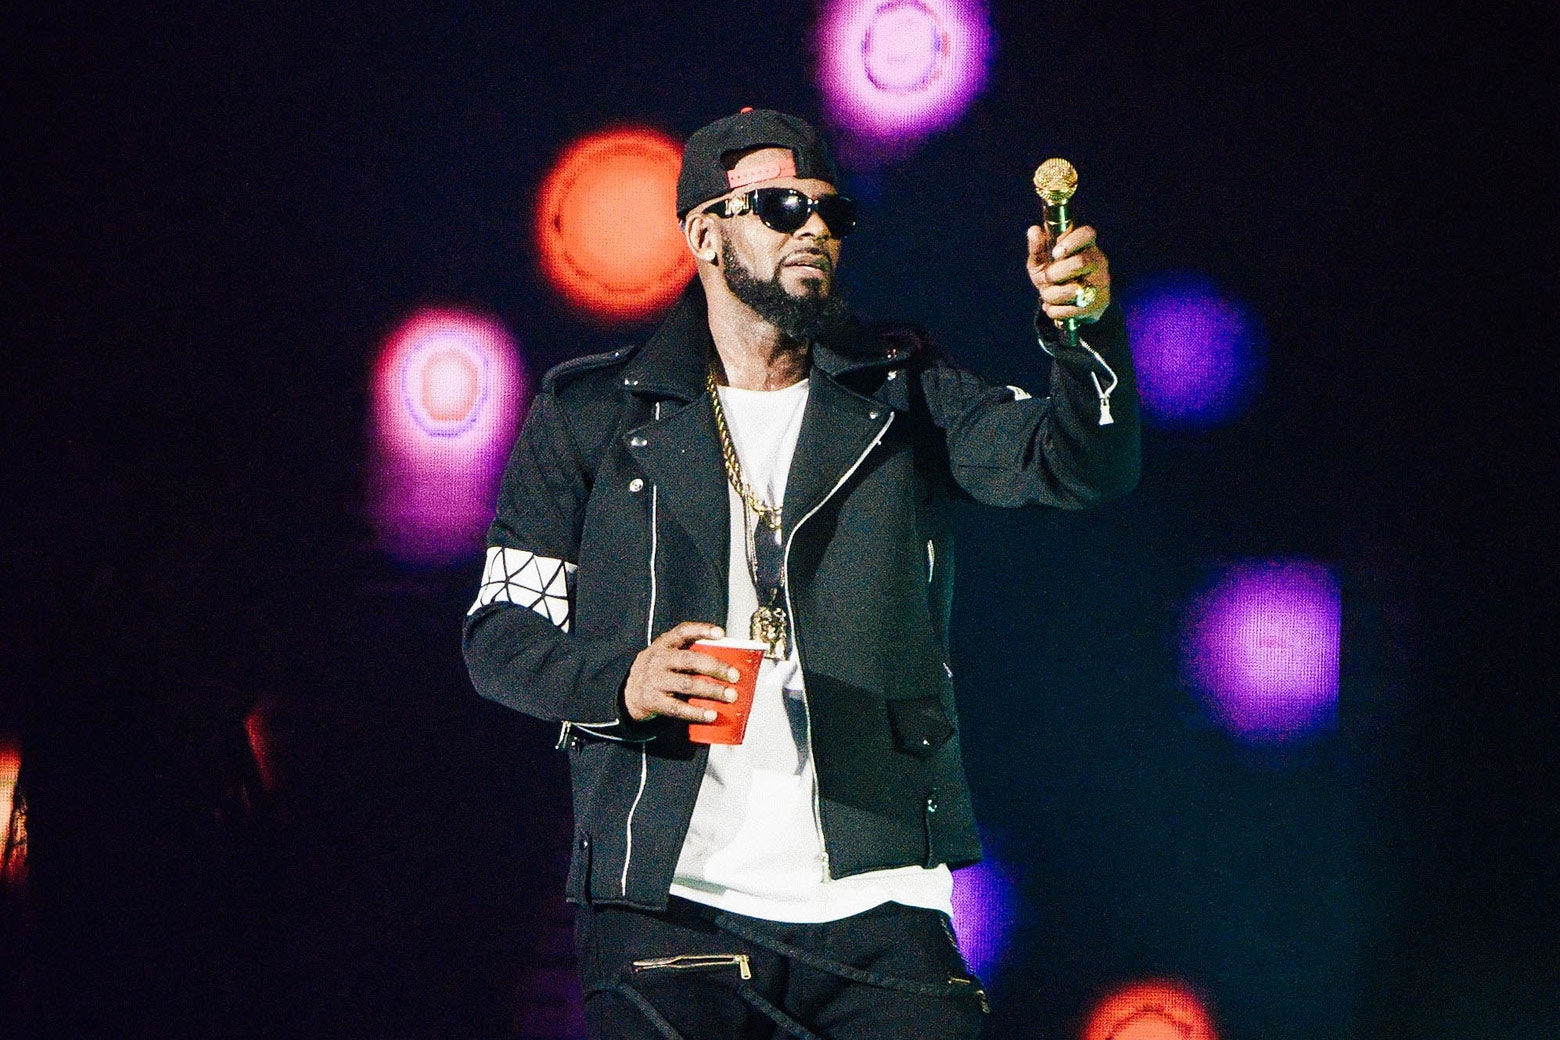 R. Kelly performs during The Buffet Tour at Allstate Arena on May 7, 2016 in Chicago, Illinois. (Photo by Daniel Boczarski/Getty Images)